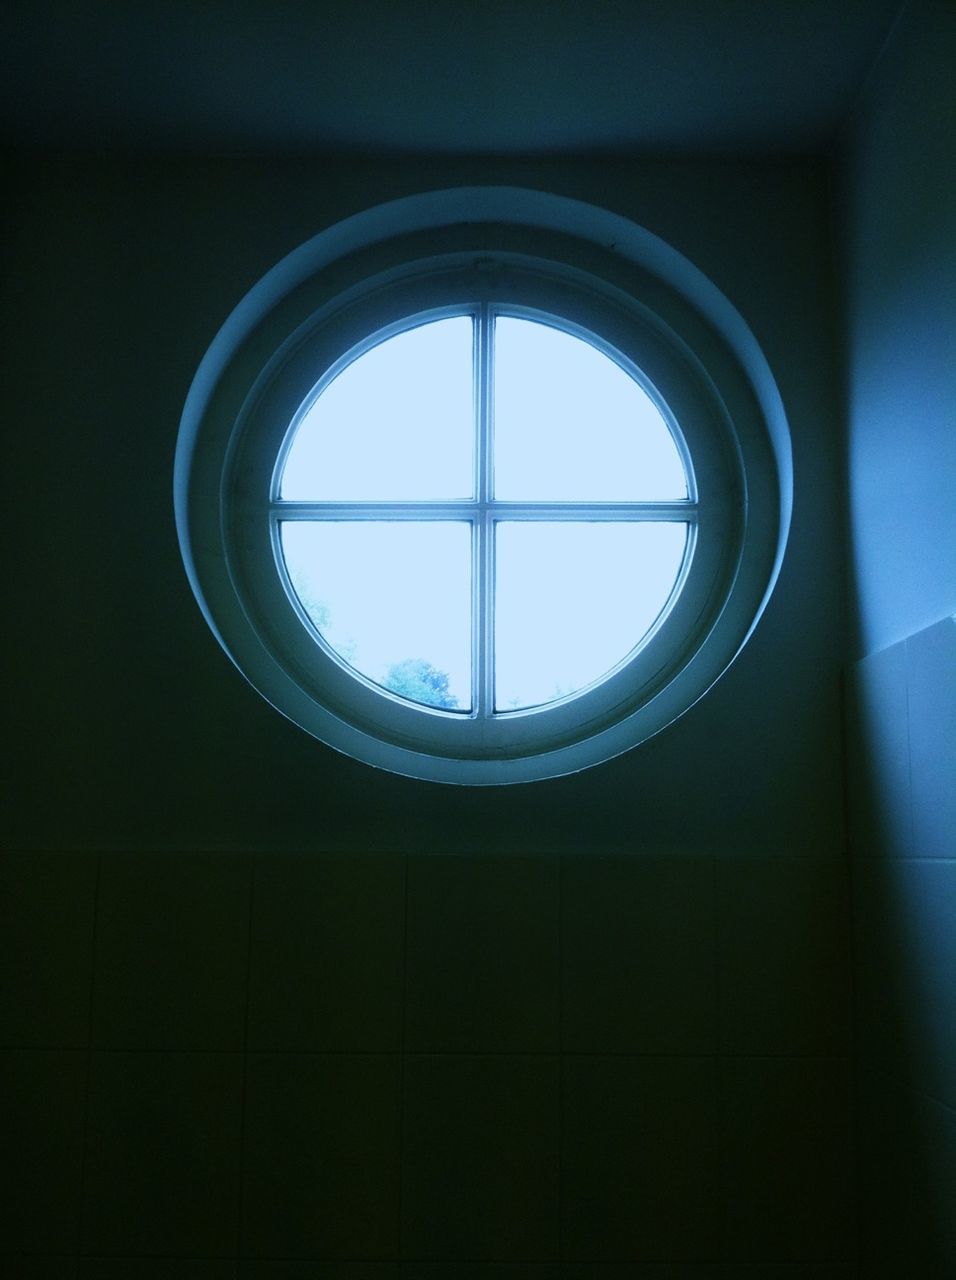 Porthole style window with clear sky view